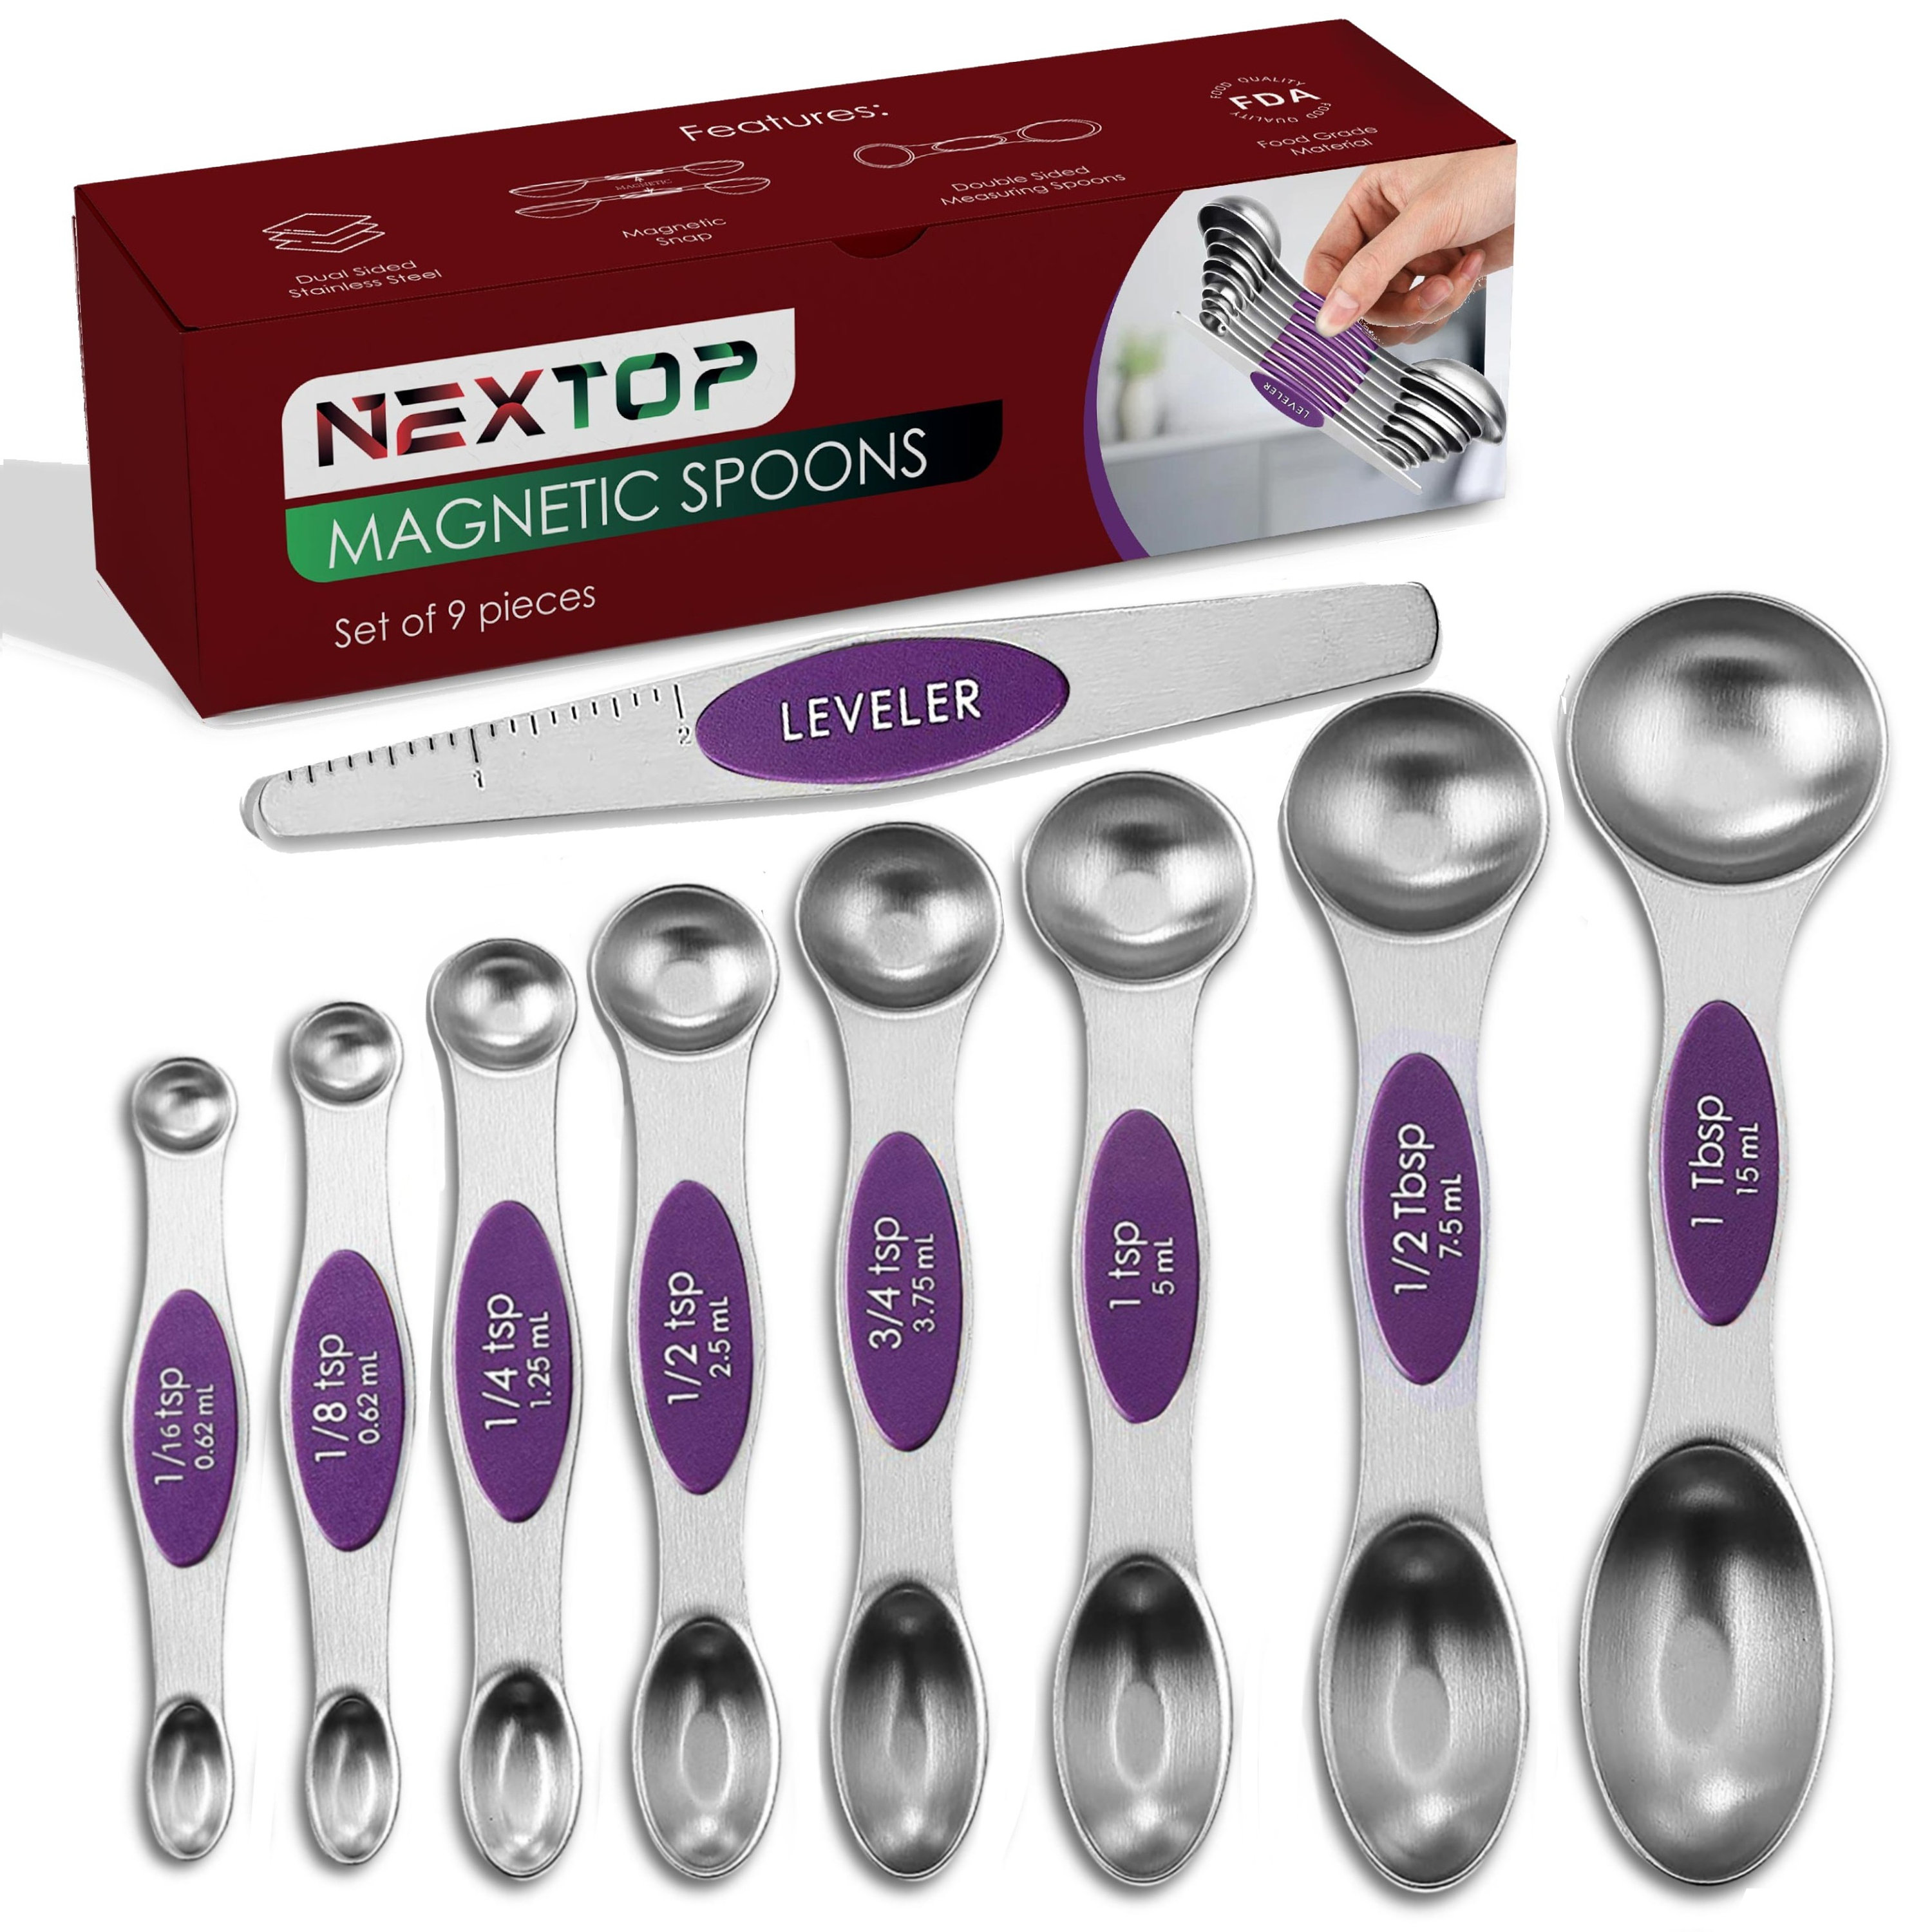 Magnetic Measuring Cups and Spoons Set Includes 7 Stainless Steel Measuring Cups 6 Stackable Magnetic Measuring Spoons with 1 Leveler for Dry and